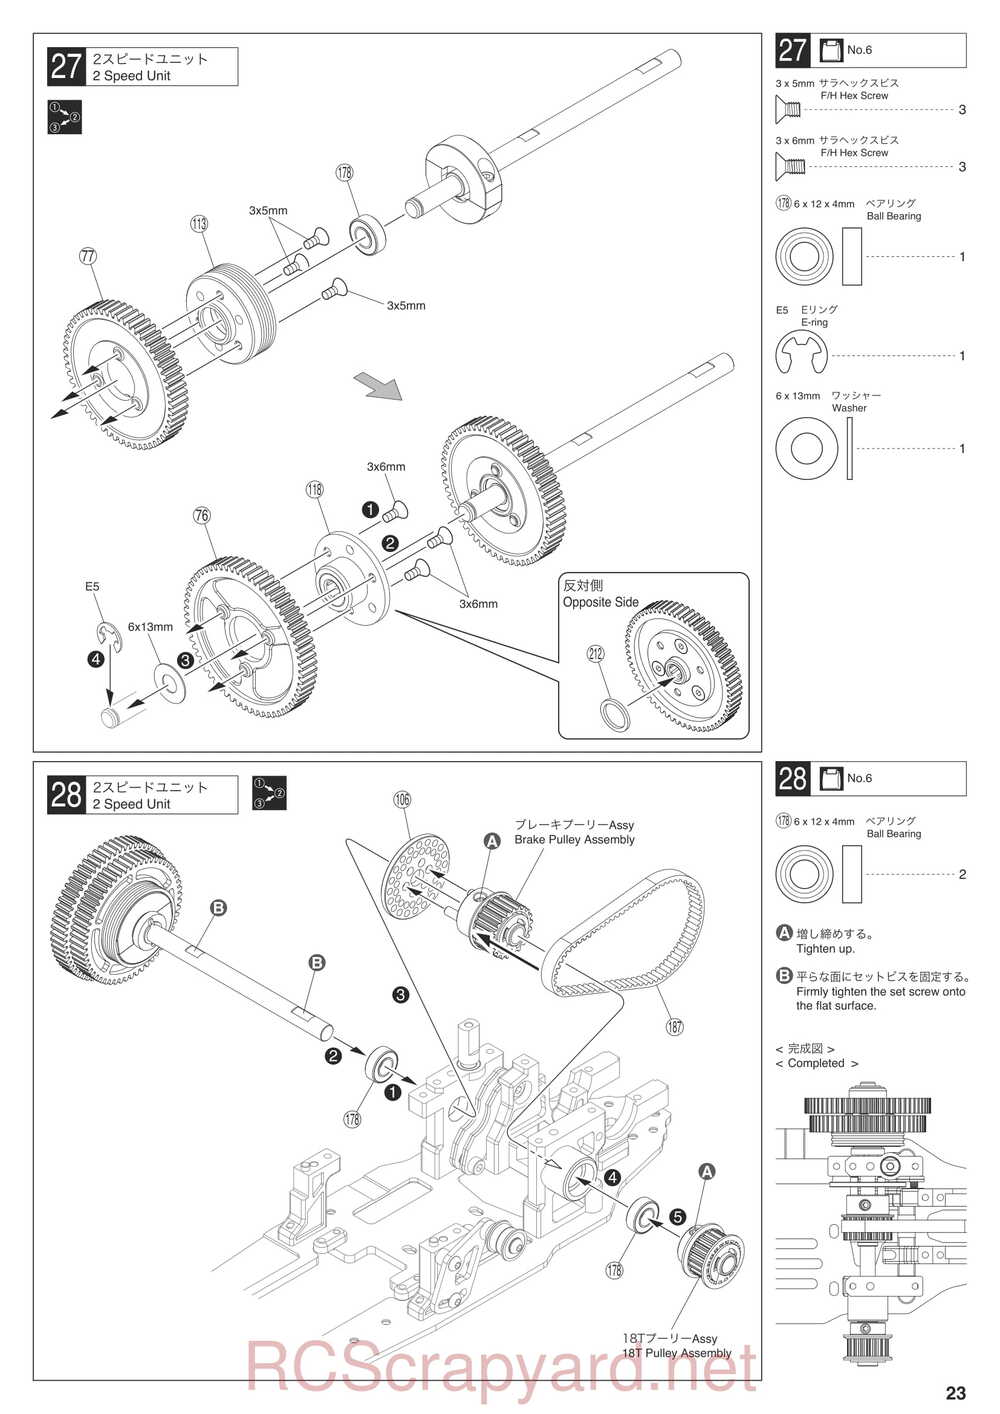 Kyosho - 31265 - V-ONE-R4 - Manual - Page 23